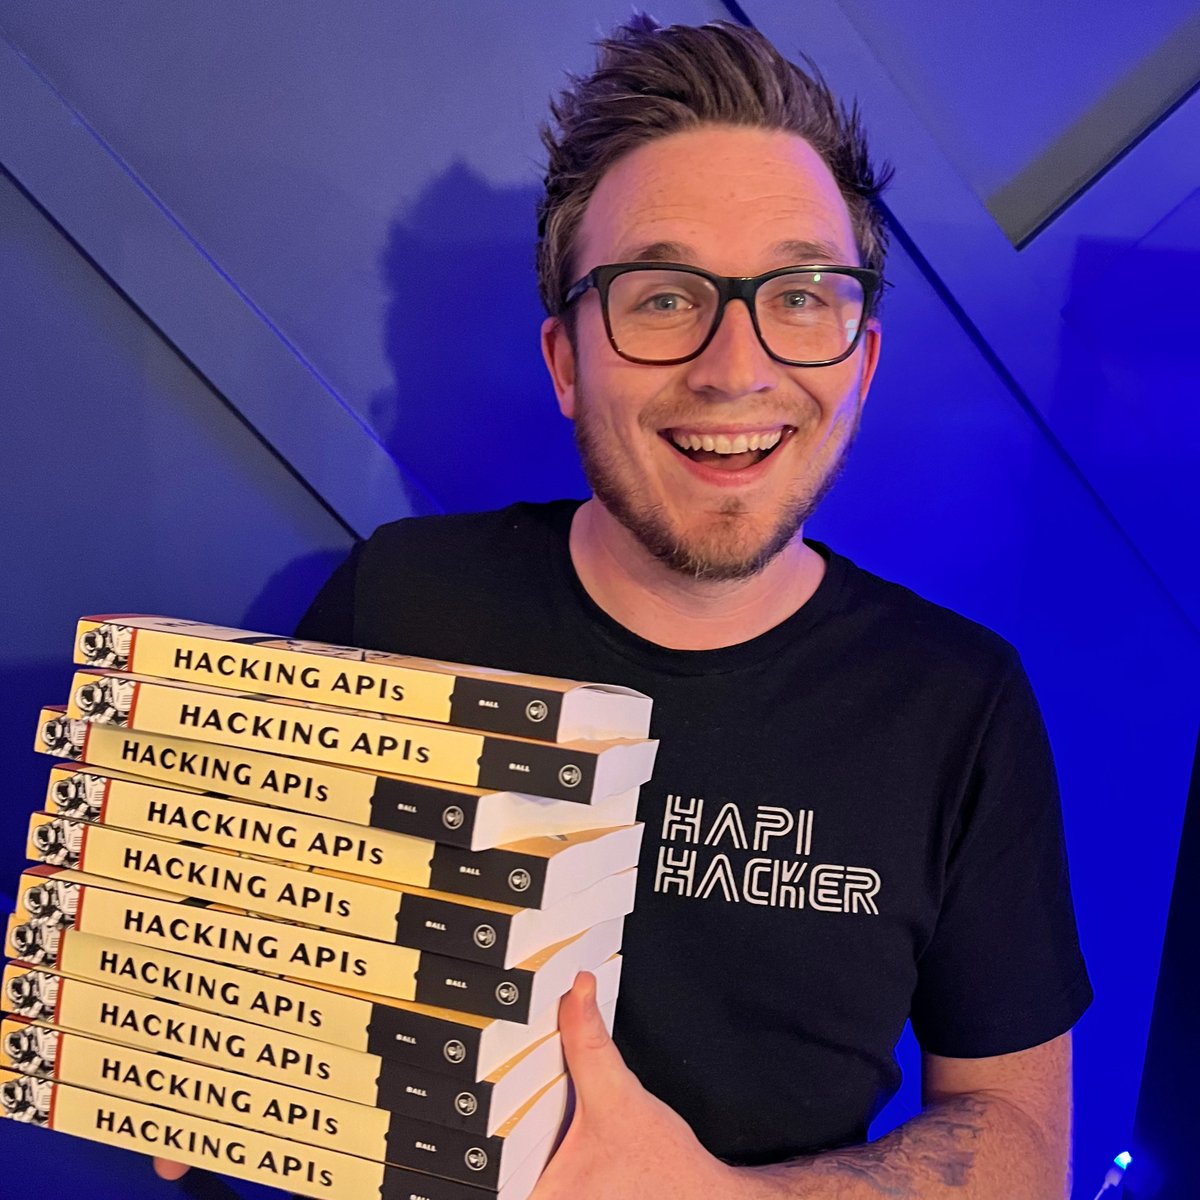 Hacking APIs Book Giveaway sponsored by APIsec.ai! We are giving away 10 print books. One entry per: ♥️ Like 🔁 RT 👑Bonus entry to anyone who follows @apisec_ai. Ends in 48 hours!